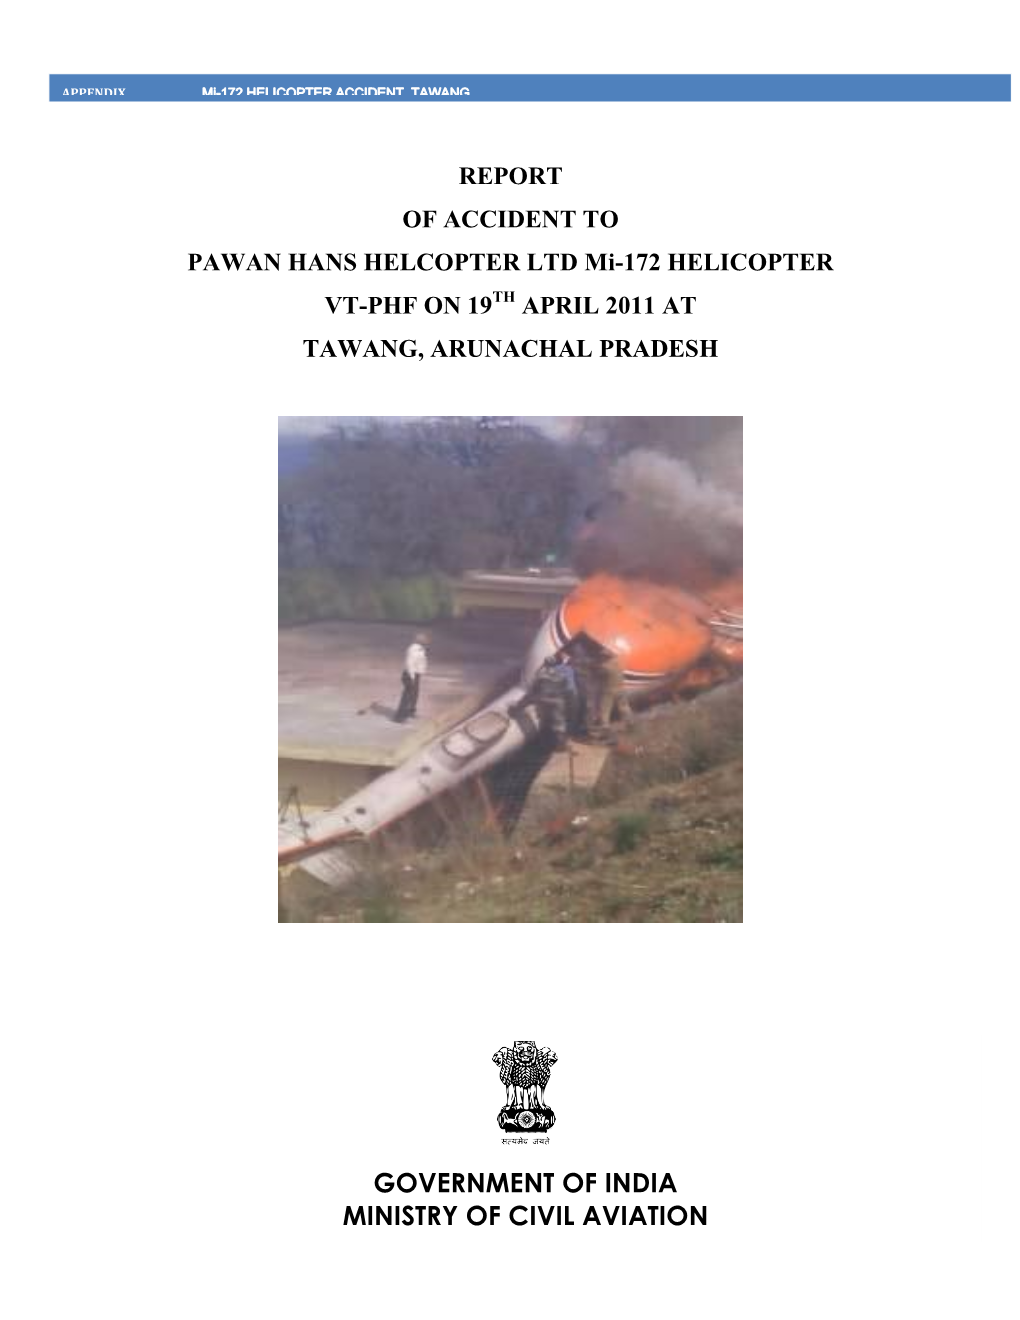 Report on Accident to Pawan Hans Helicopters Ltd MI-172 Helicopter